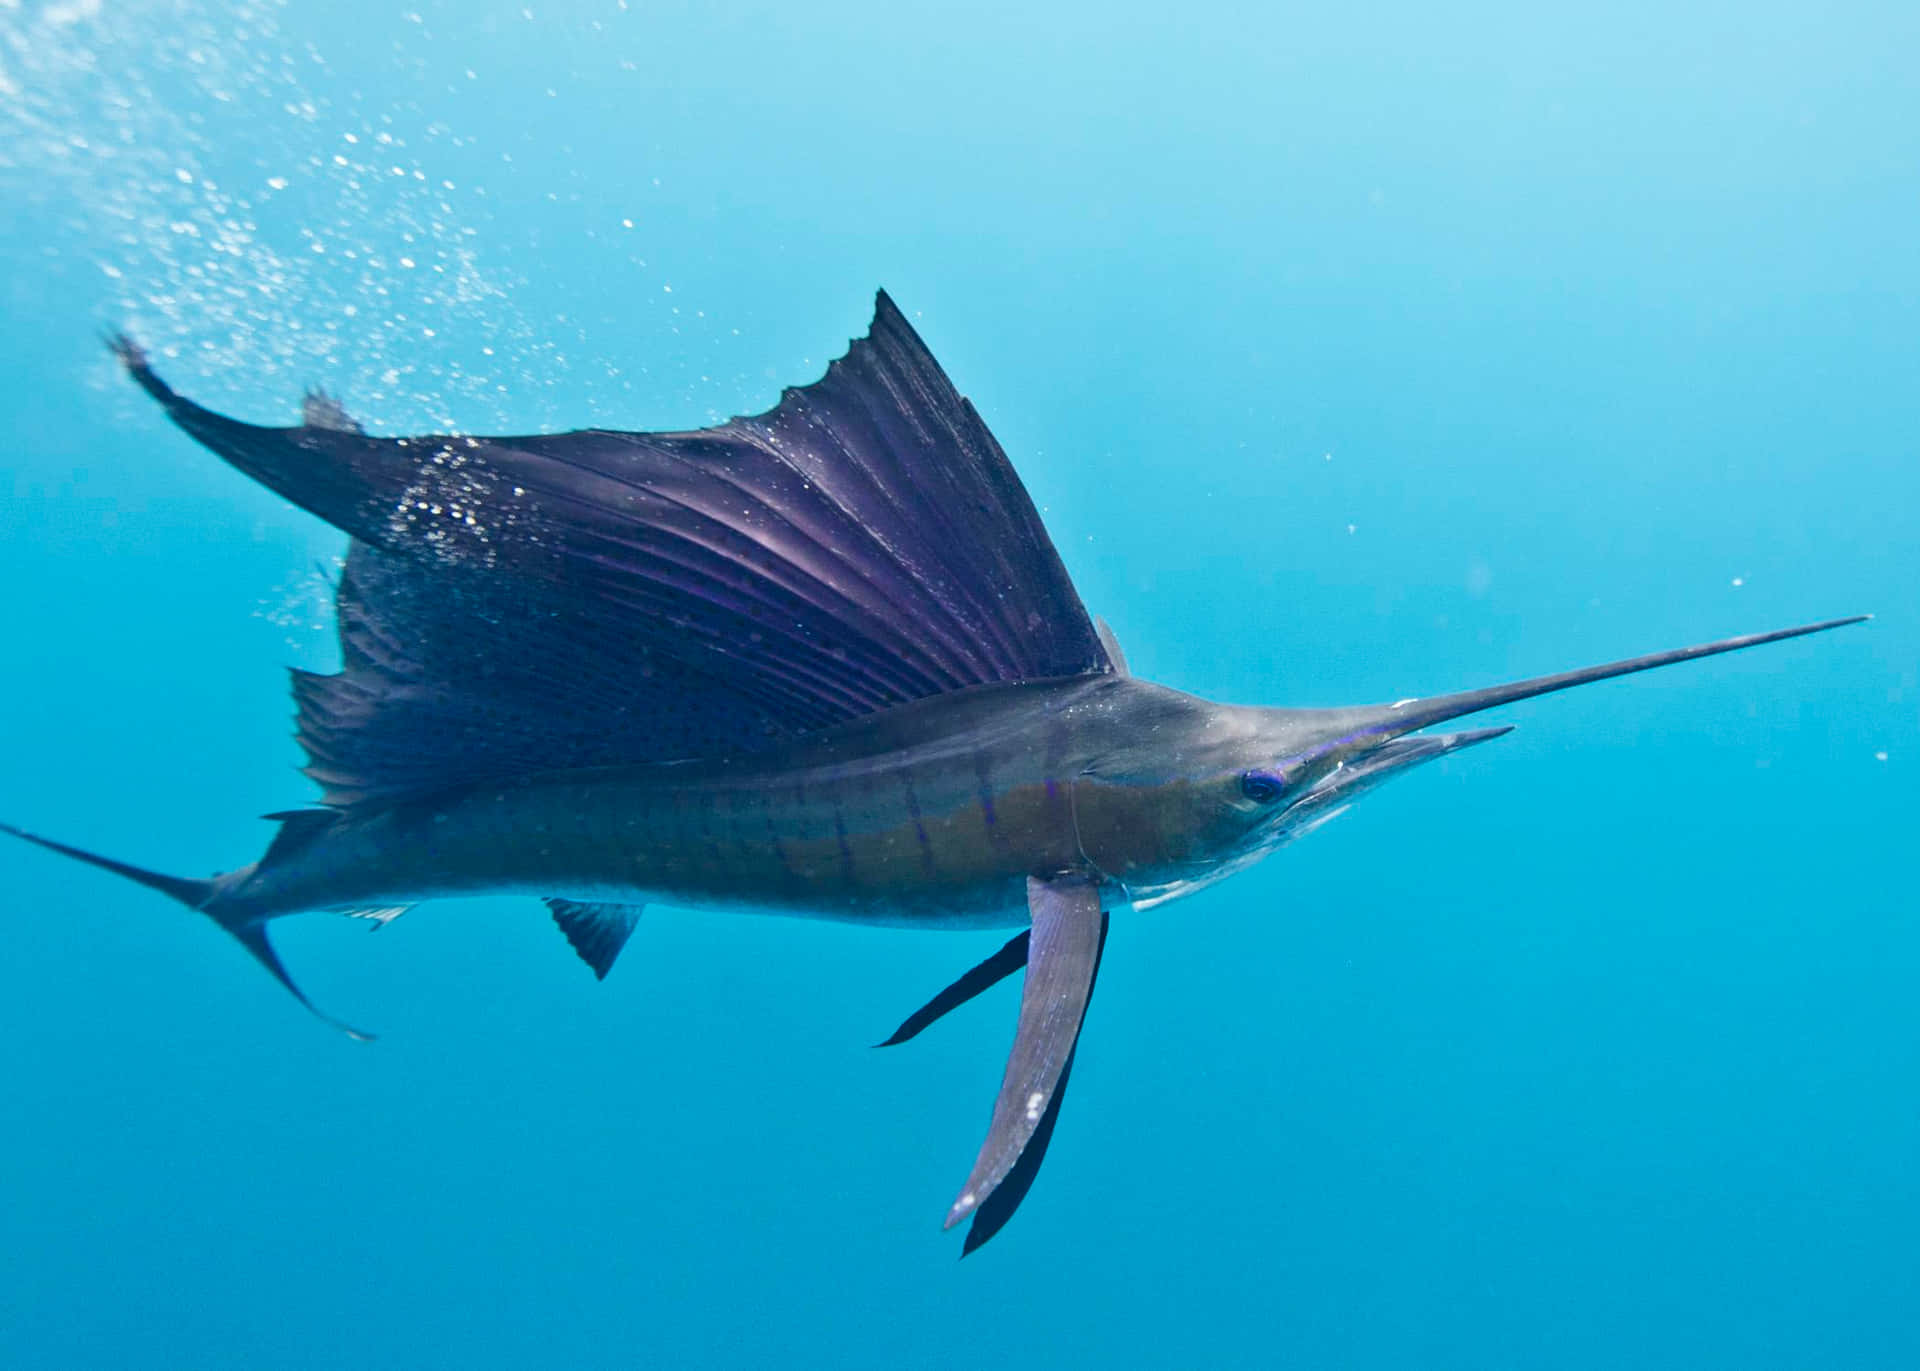 “Sailfish Leaping Out of the Ocean”